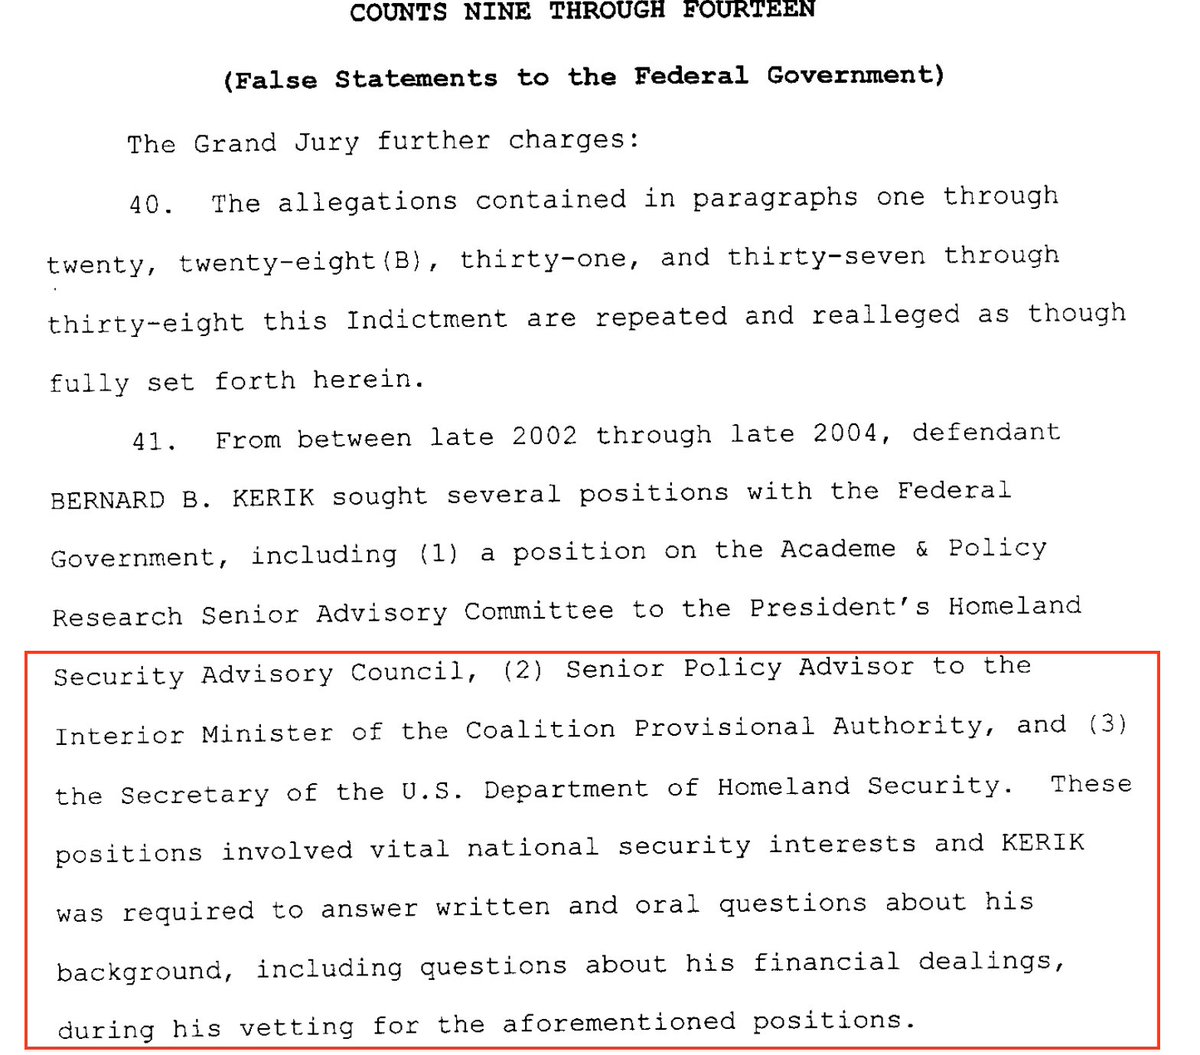 HERE'S WHERE WE'VE GOT SOME OLD RECEIPTS - that time Rudy tried to jam Rudy into the all-new, post-September-11 "DHS." Those disclosure forms all include the potential for felony charges if you lie by omission...